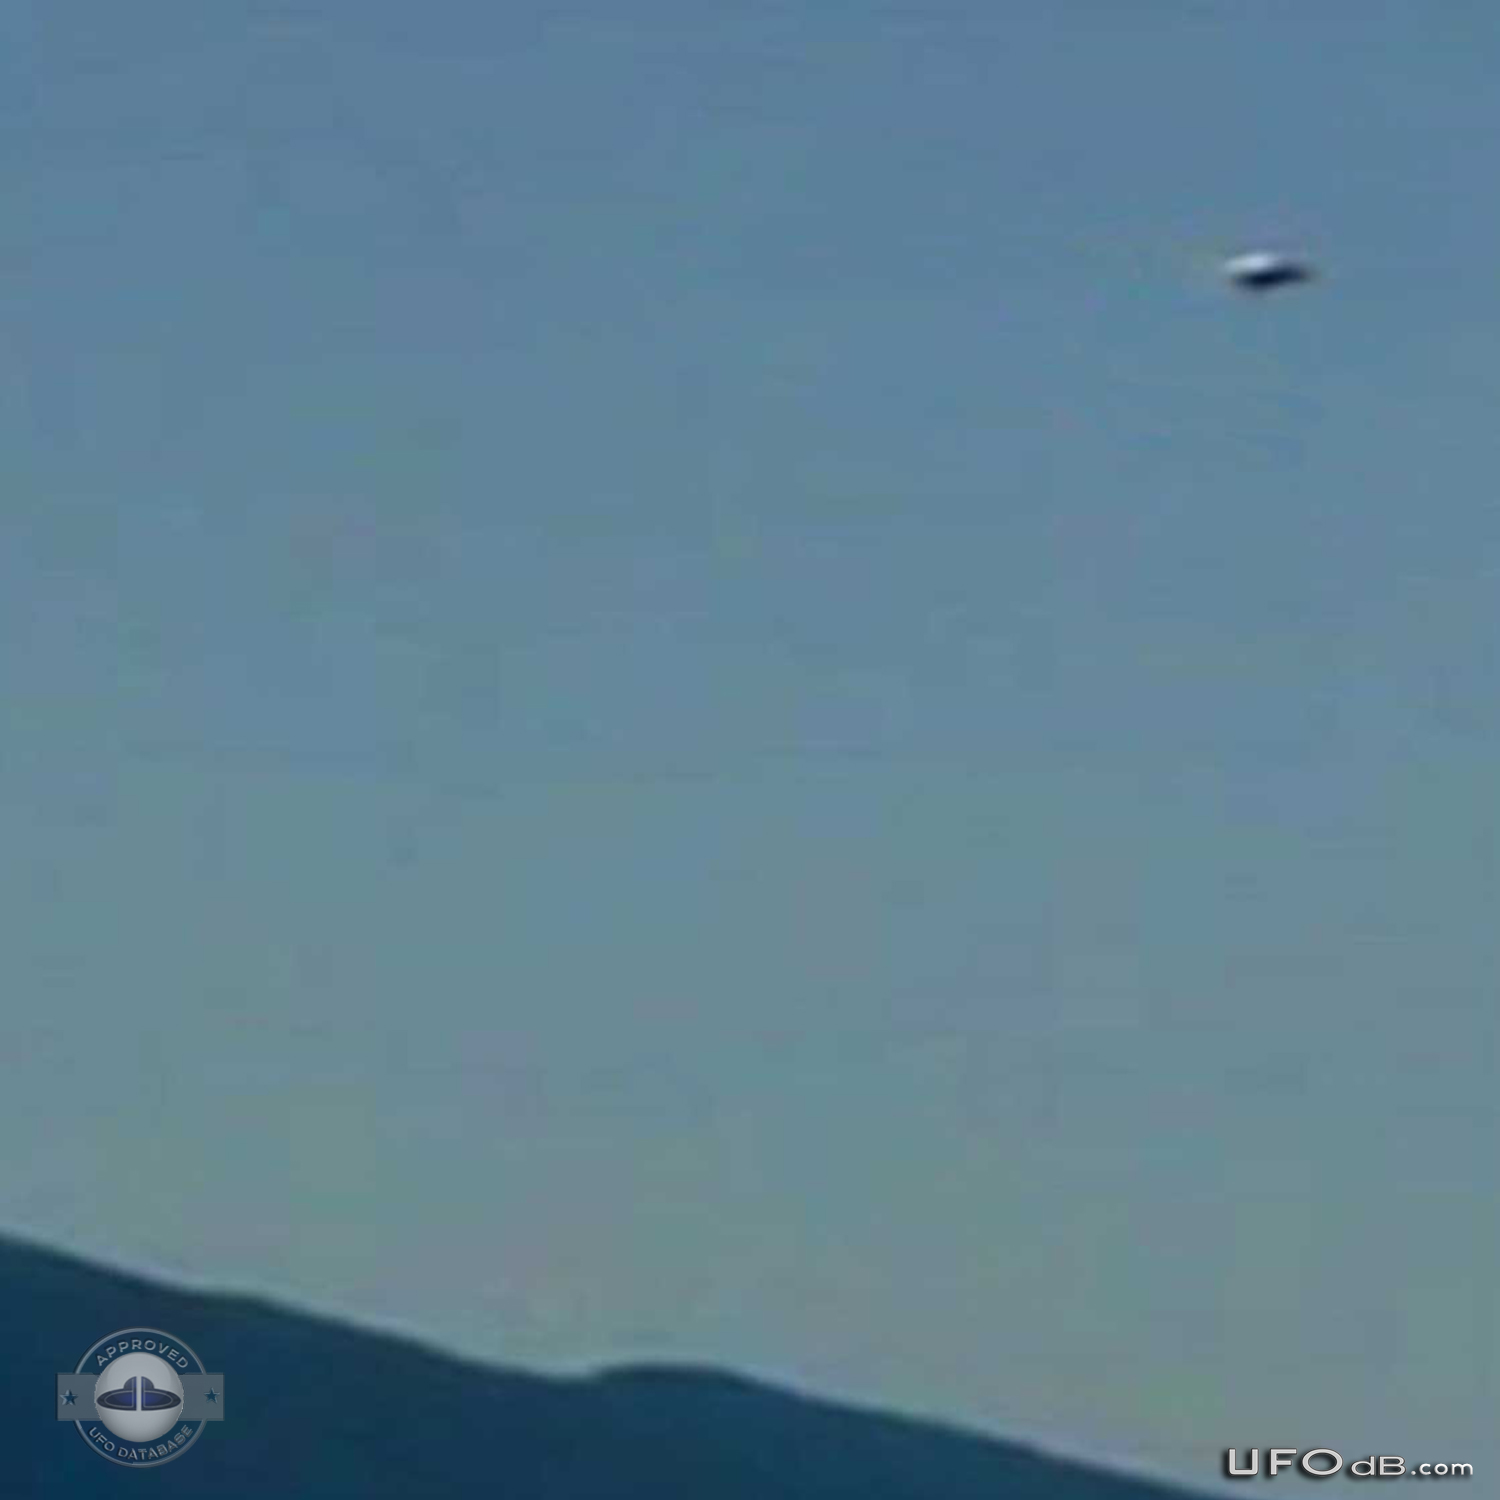 Toutist in Riva del Garda, Italy get a picture of a UFO - October 2011 UFO Picture #382-5